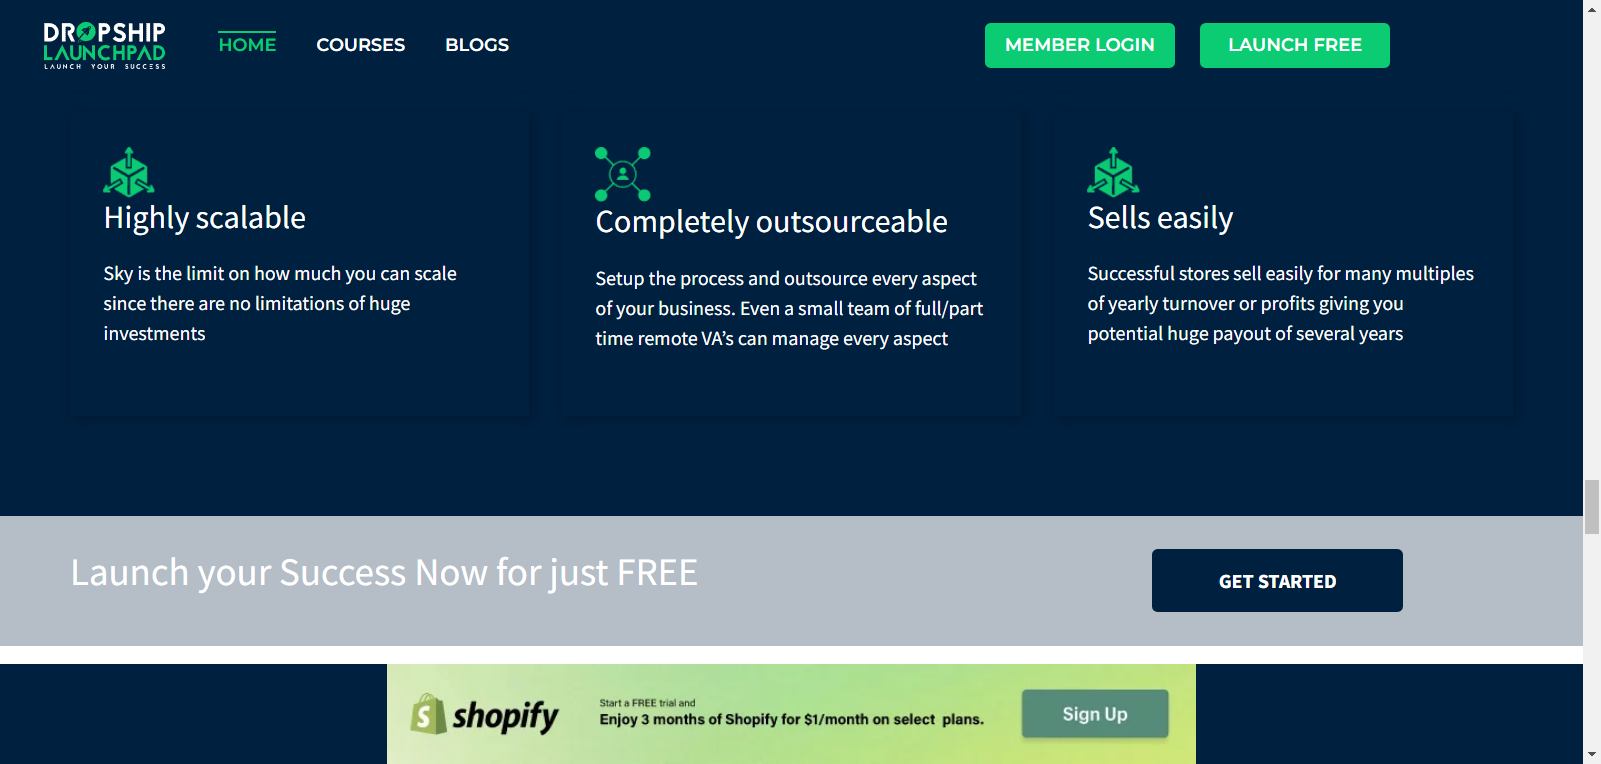 Get Free Spocket website from DROPSHIP LAUNCHPAD